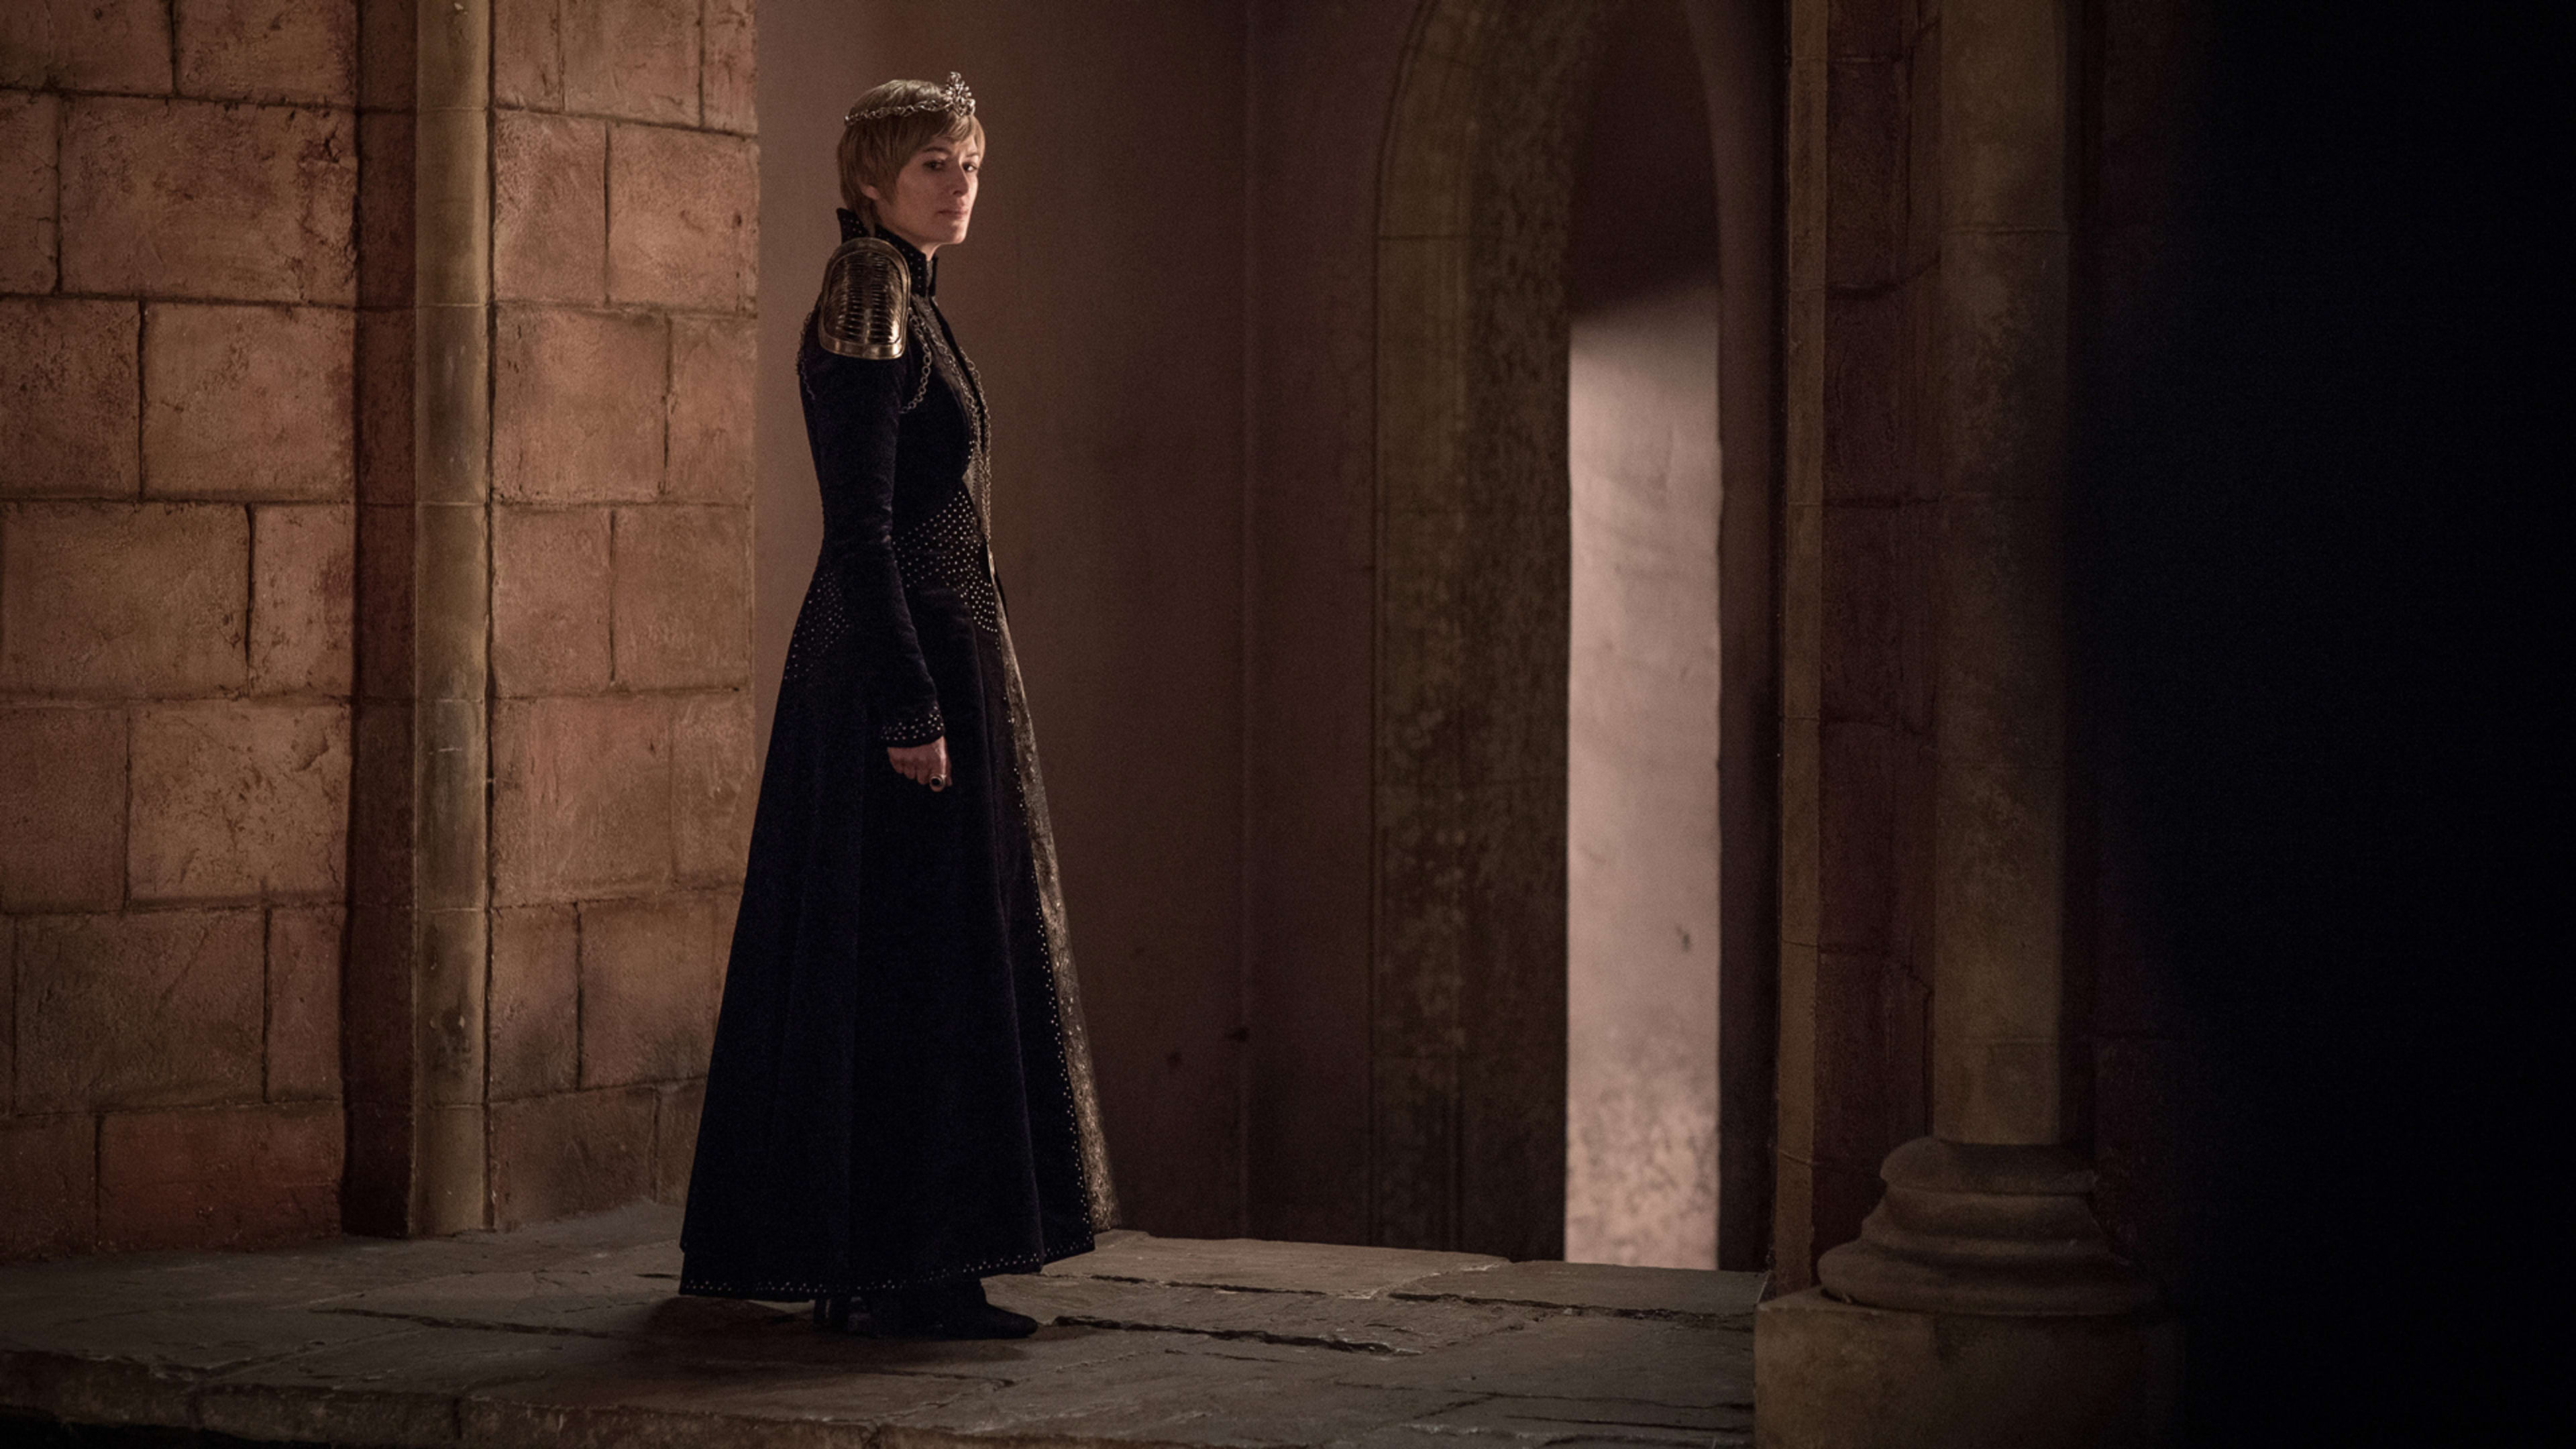 Cersei is the deadliest killer (199 bodies!) and other terrifically morbid Game of Thrones data